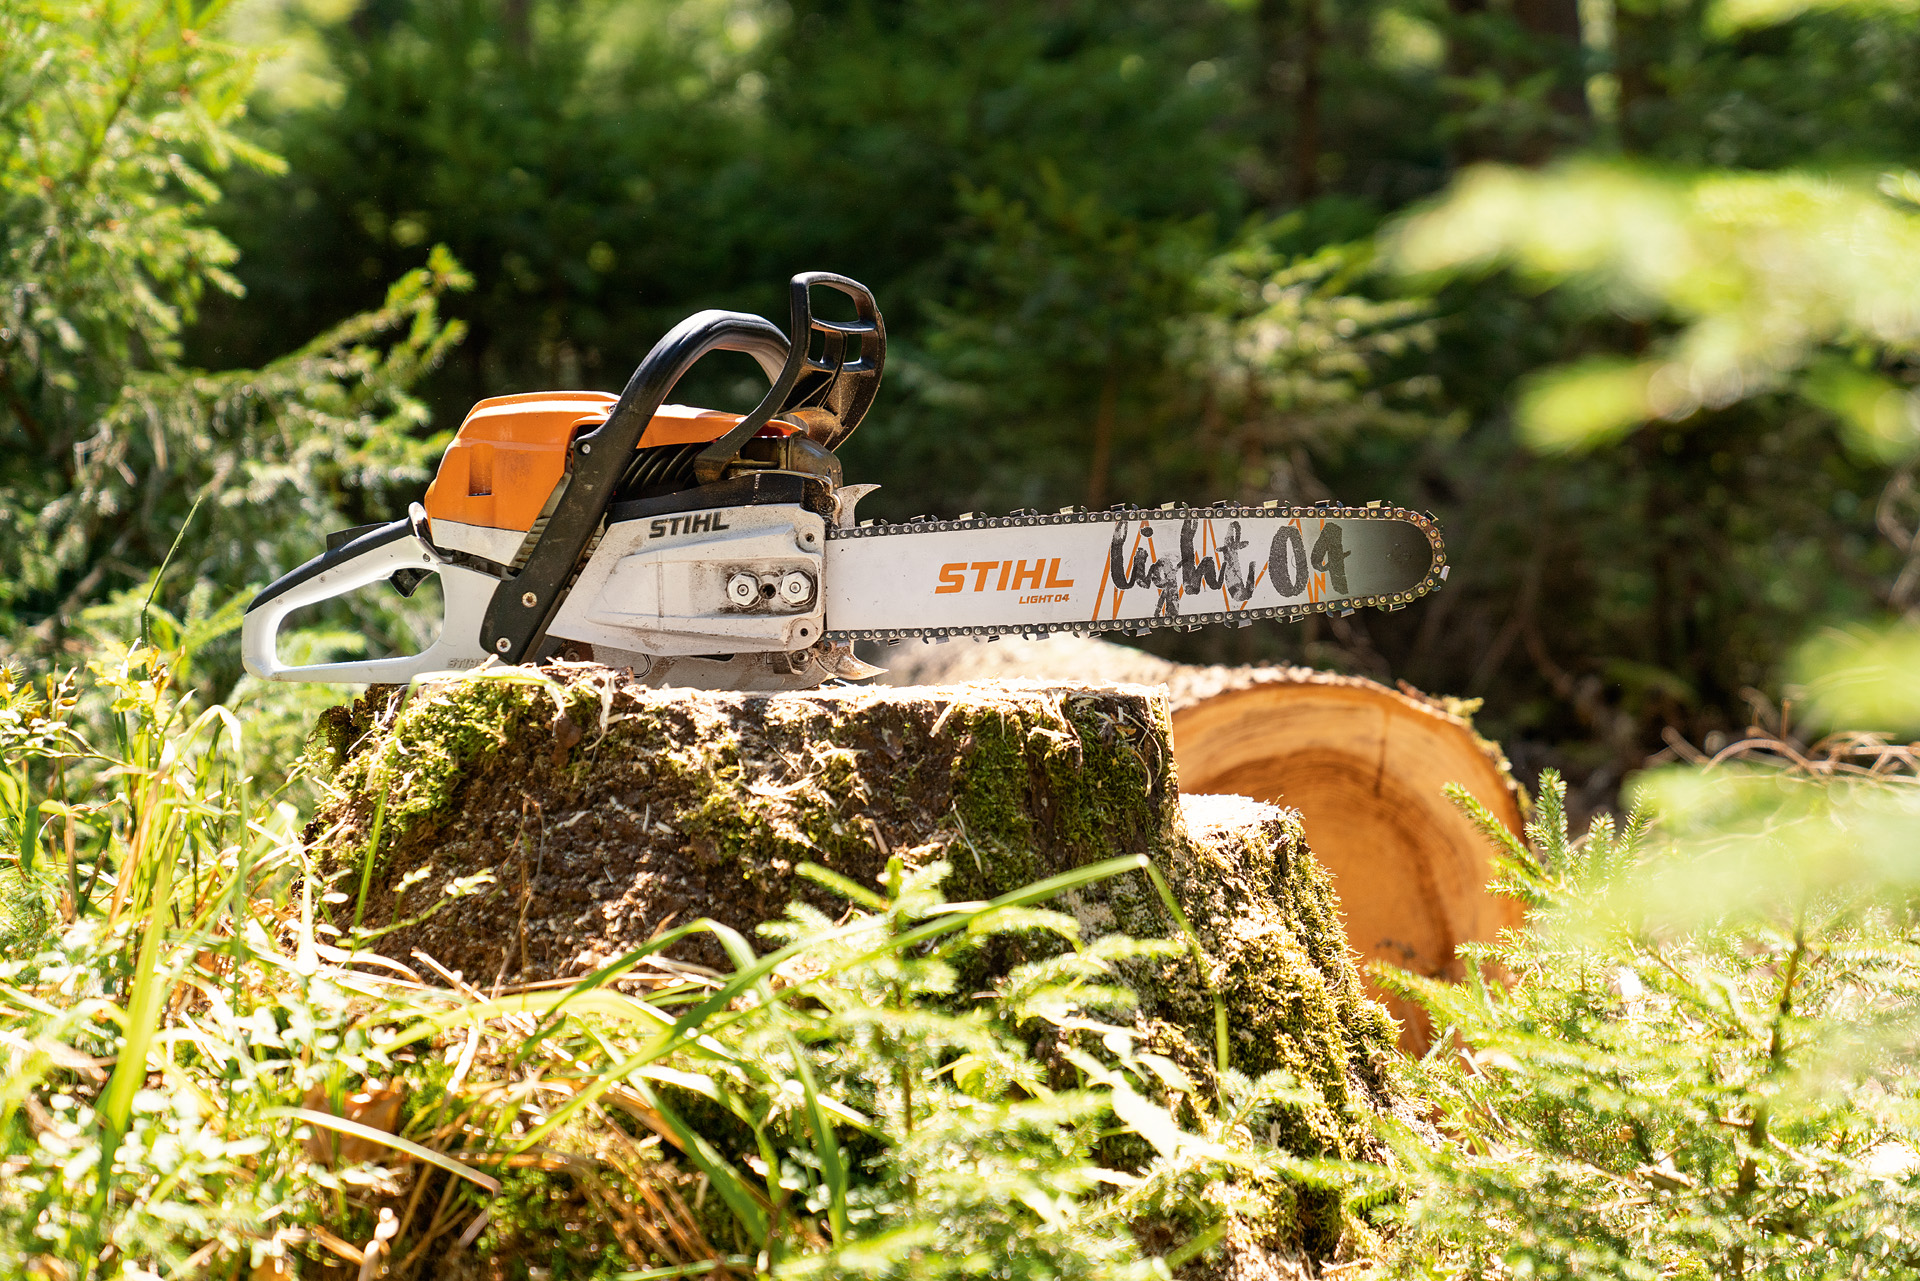 STIHL MS180 С-BE Fast Tension Of The Chain 35 cm And ErgoStart System  Original